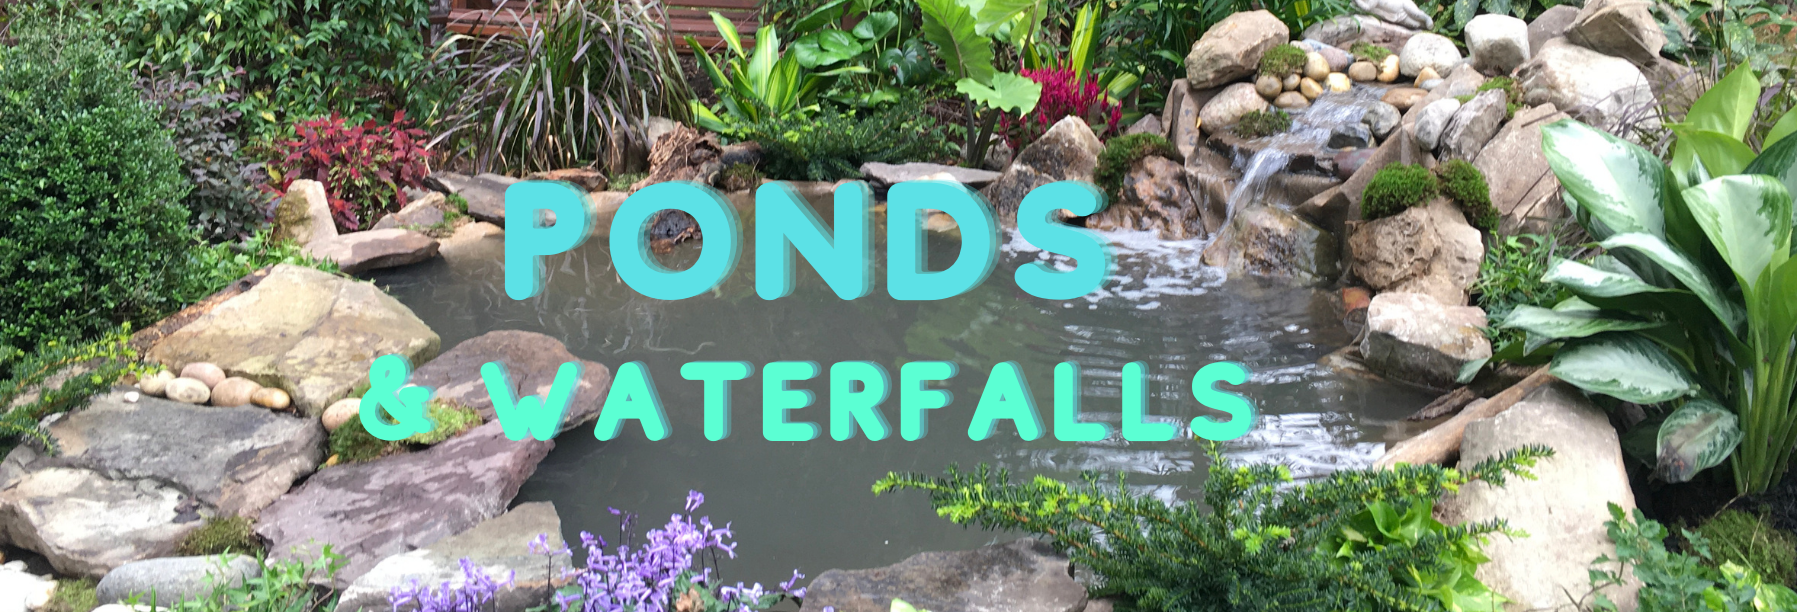 ponds with waterfall banner image